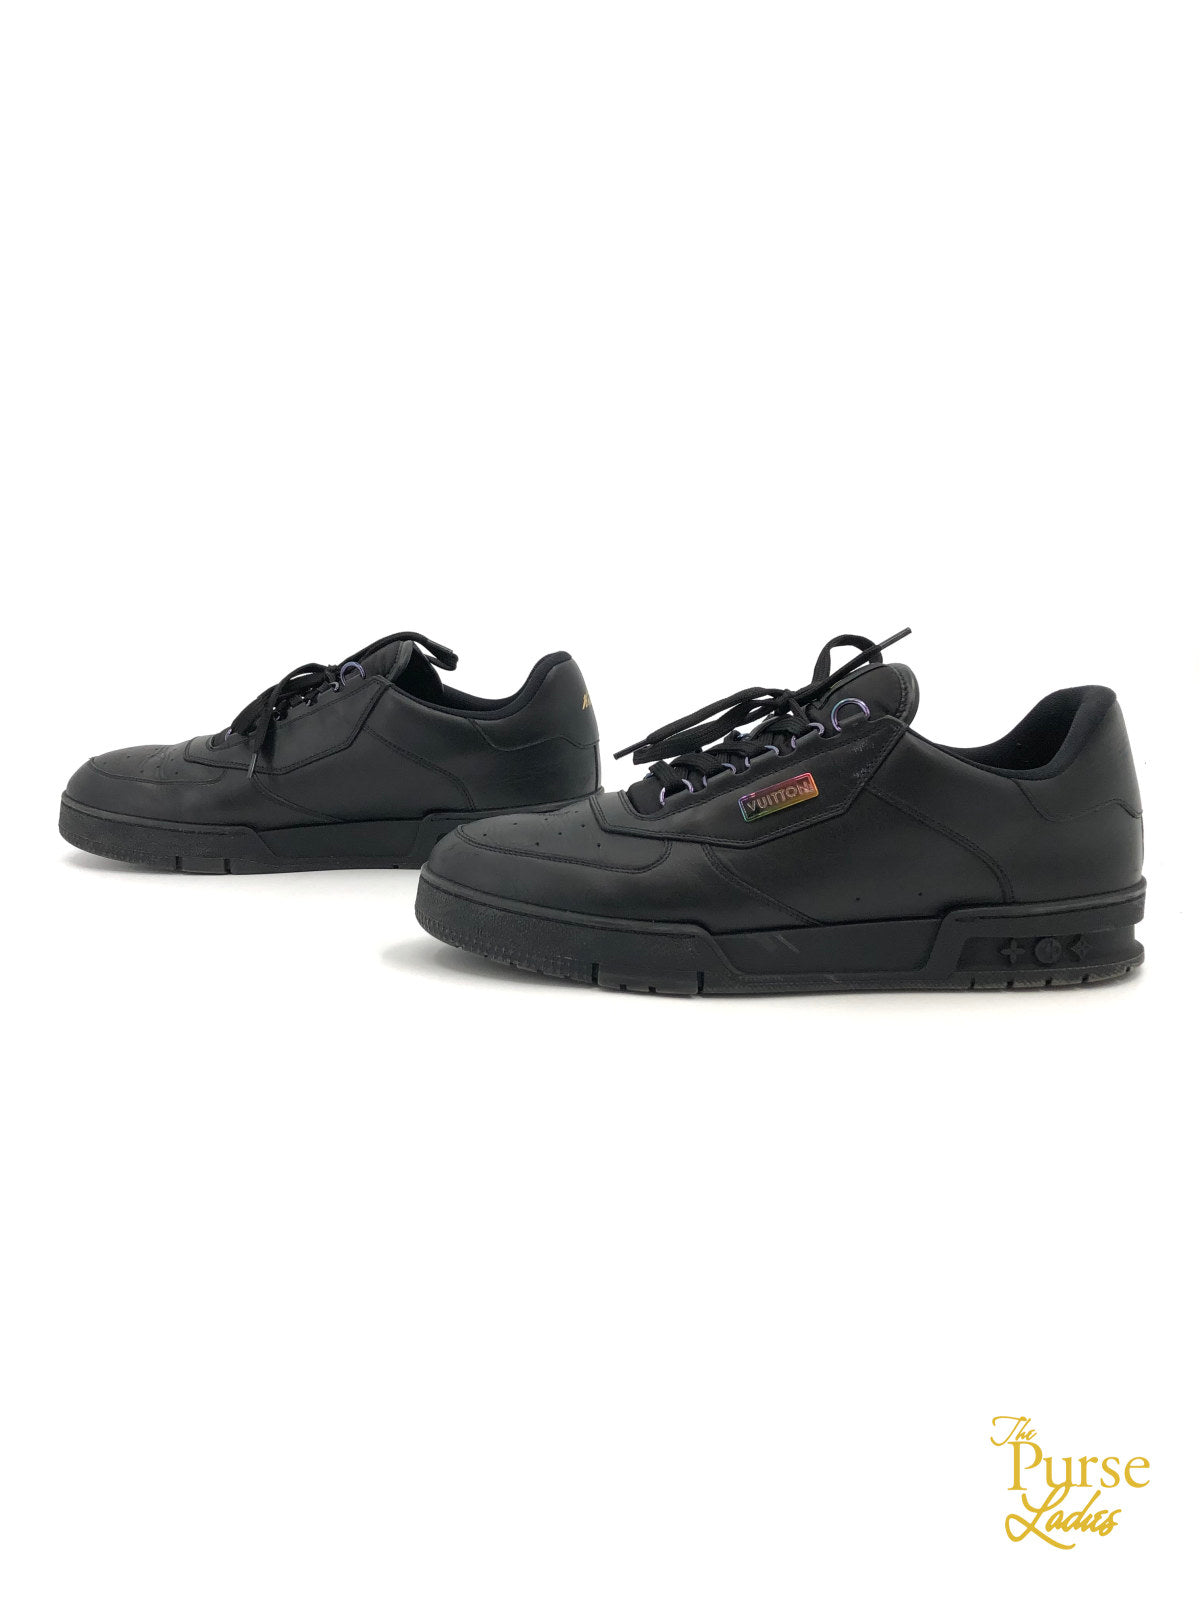 Leather trainers Louis Vuitton Black size 39 EU in Leather - 35637684